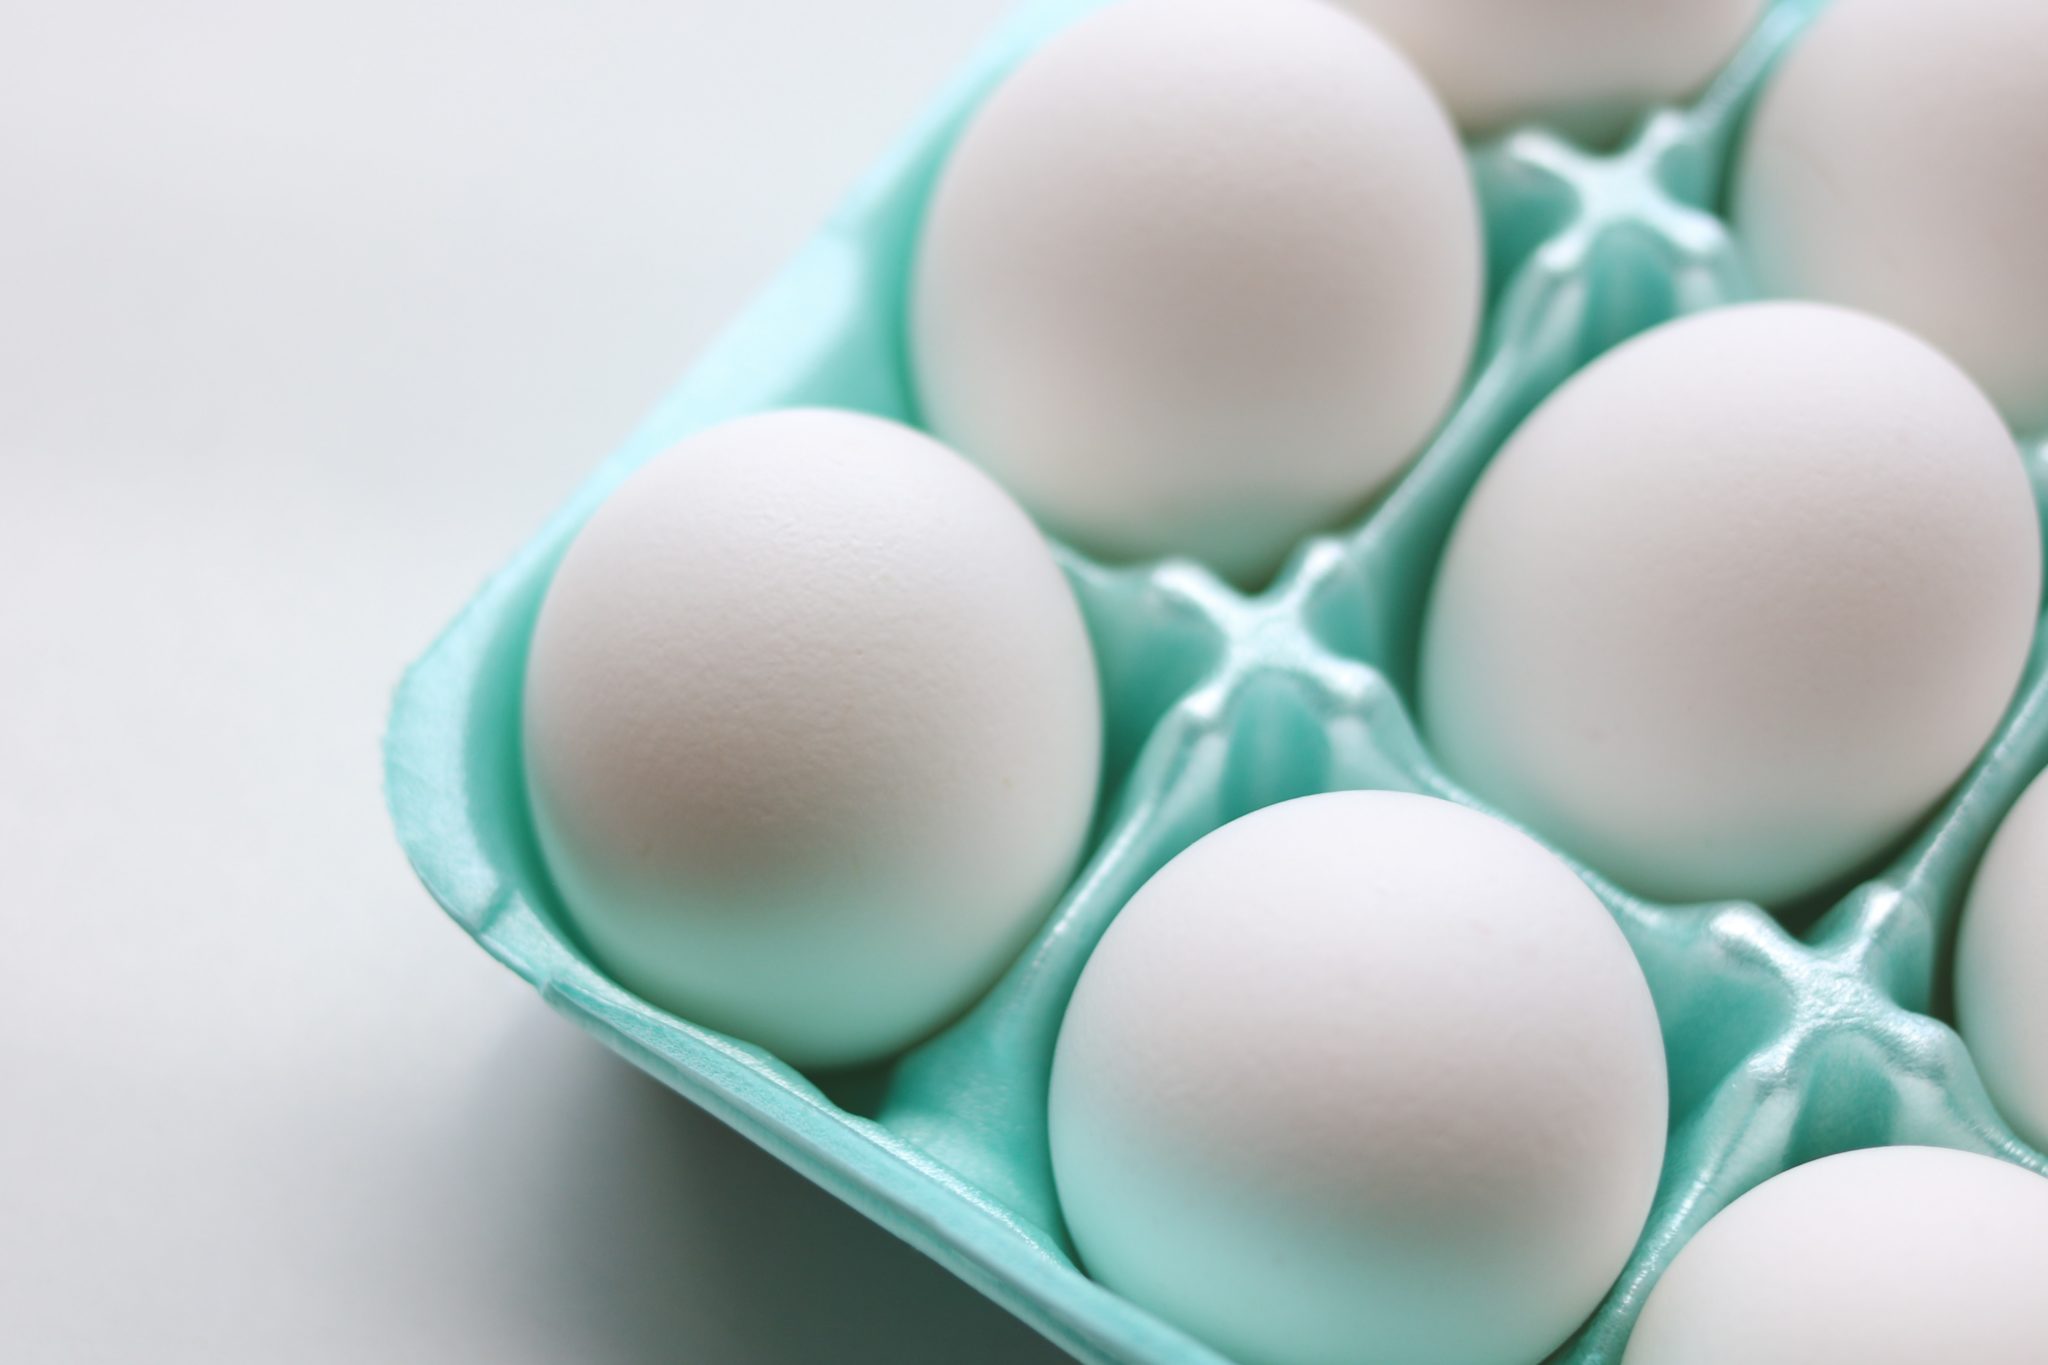 reuse packaging from egg cartons